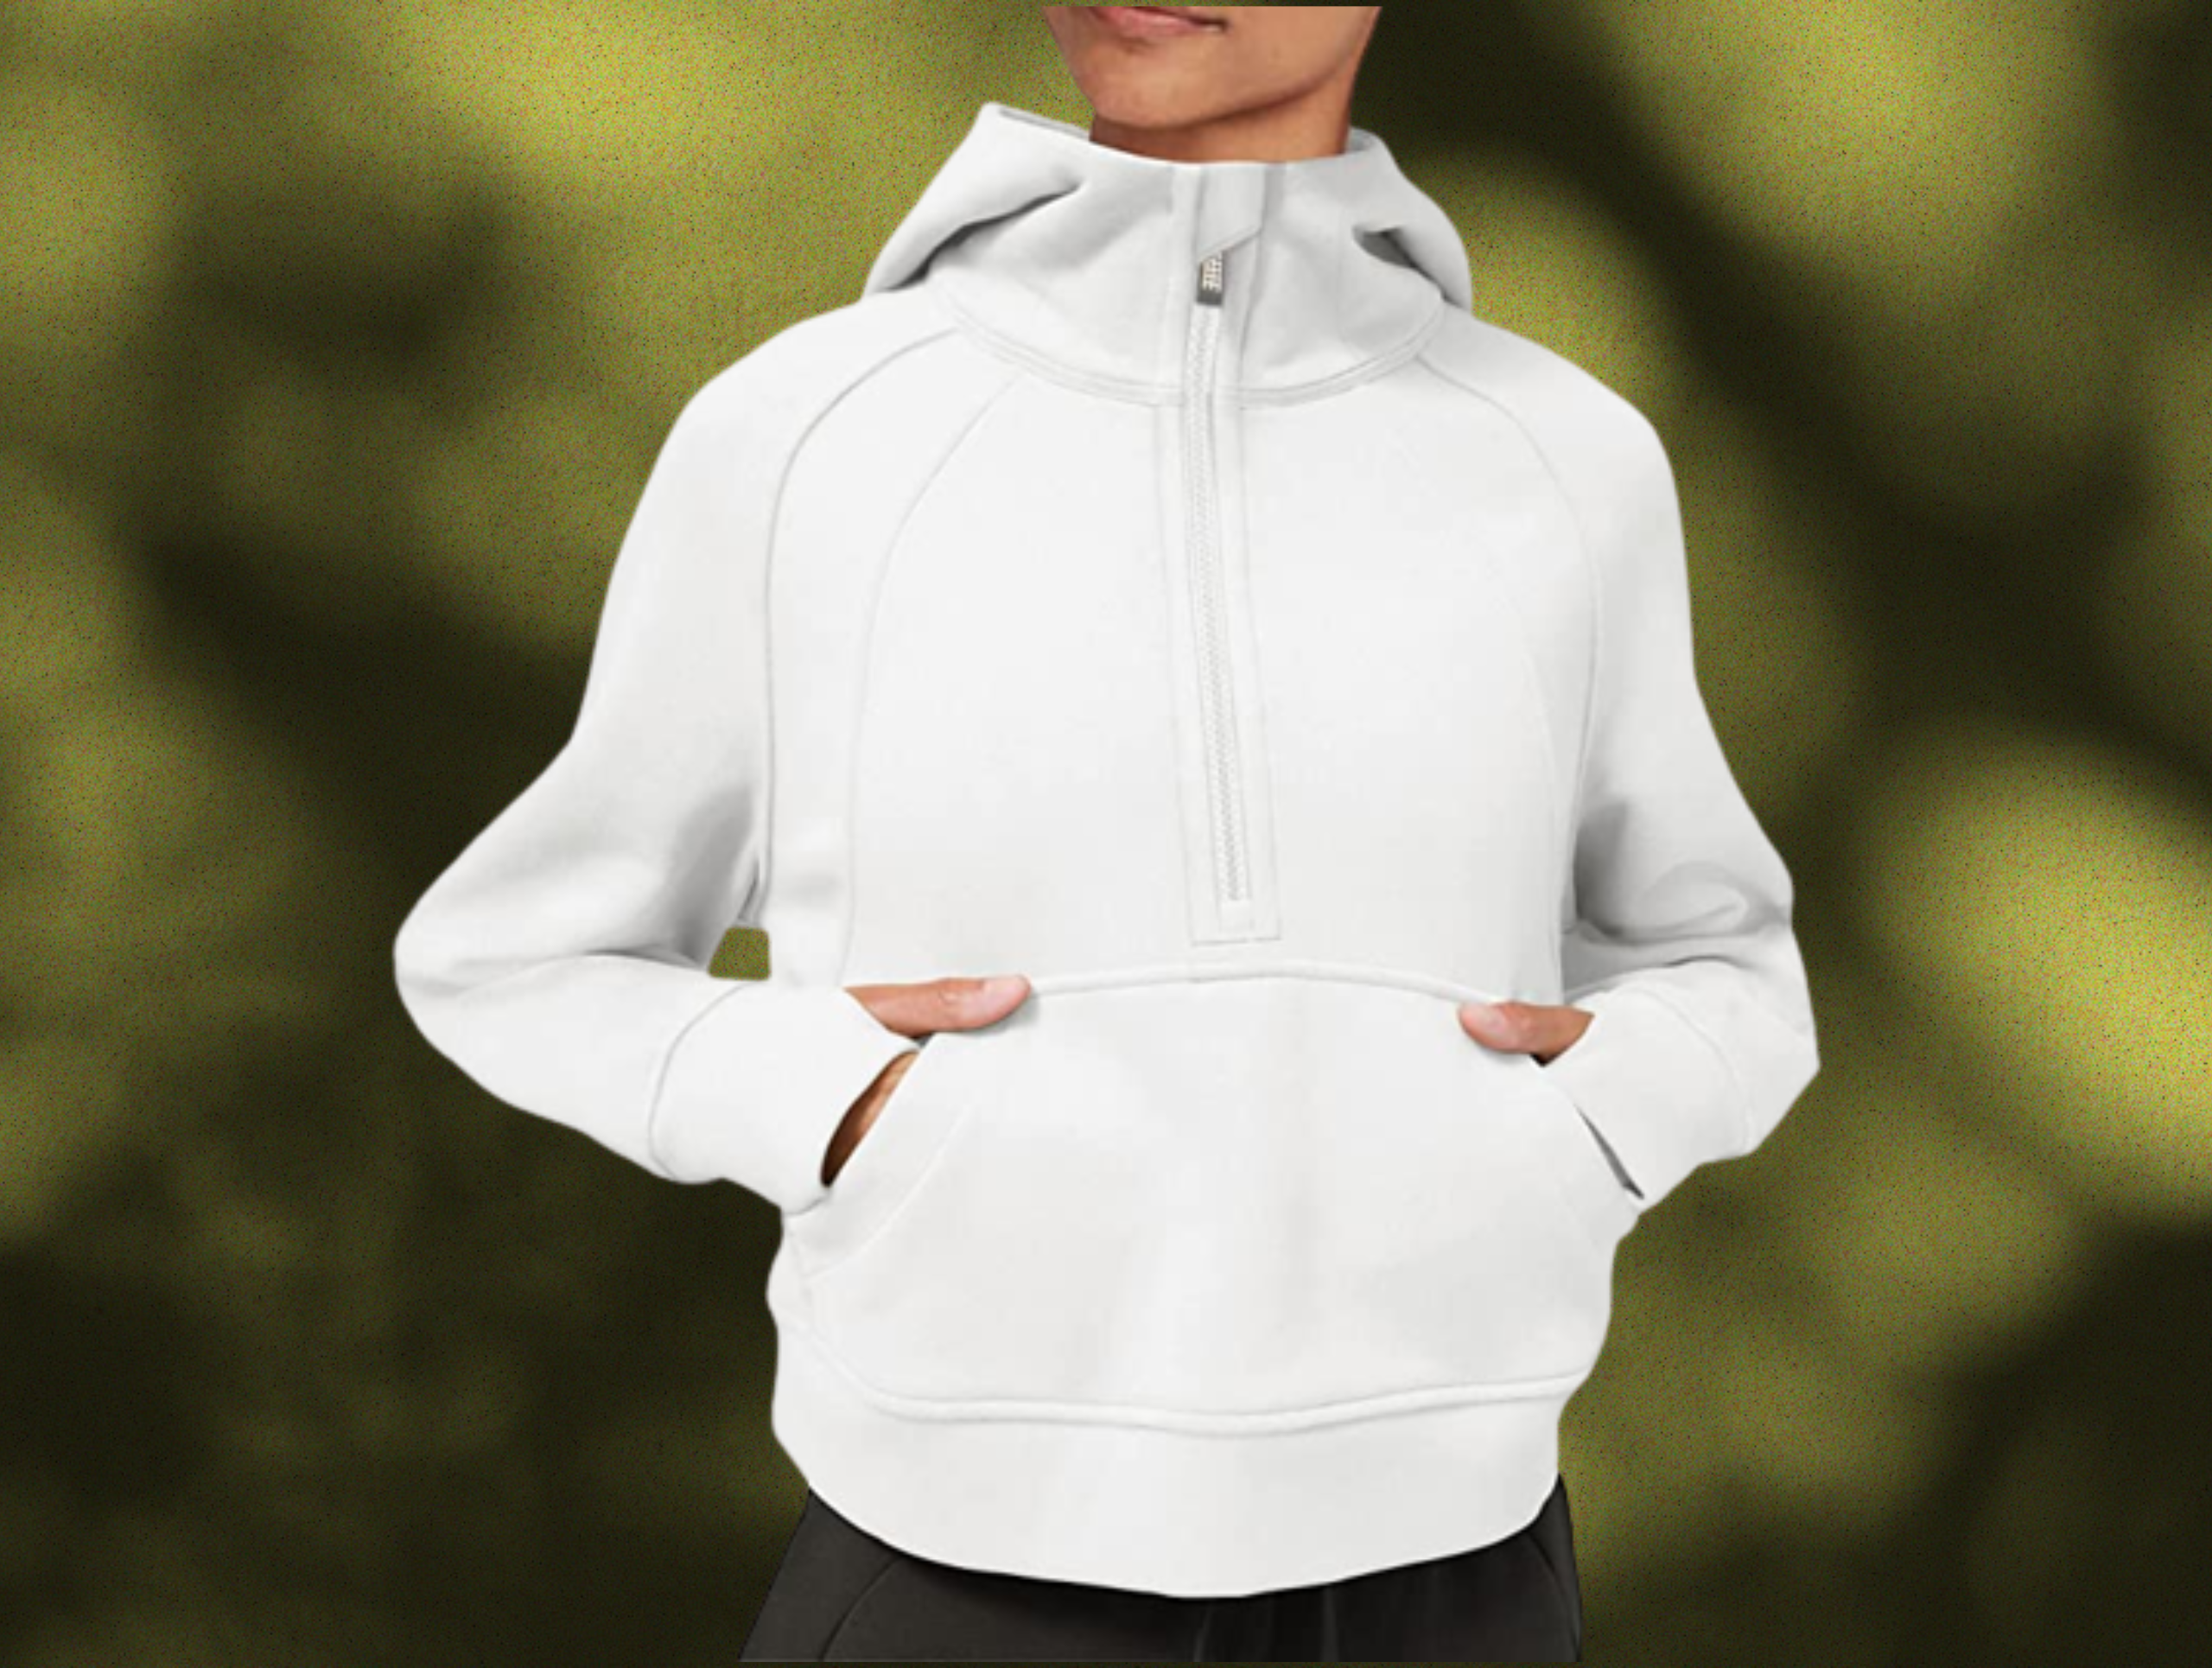 Scuba half zip! Not sure if I actually like this or if I only like